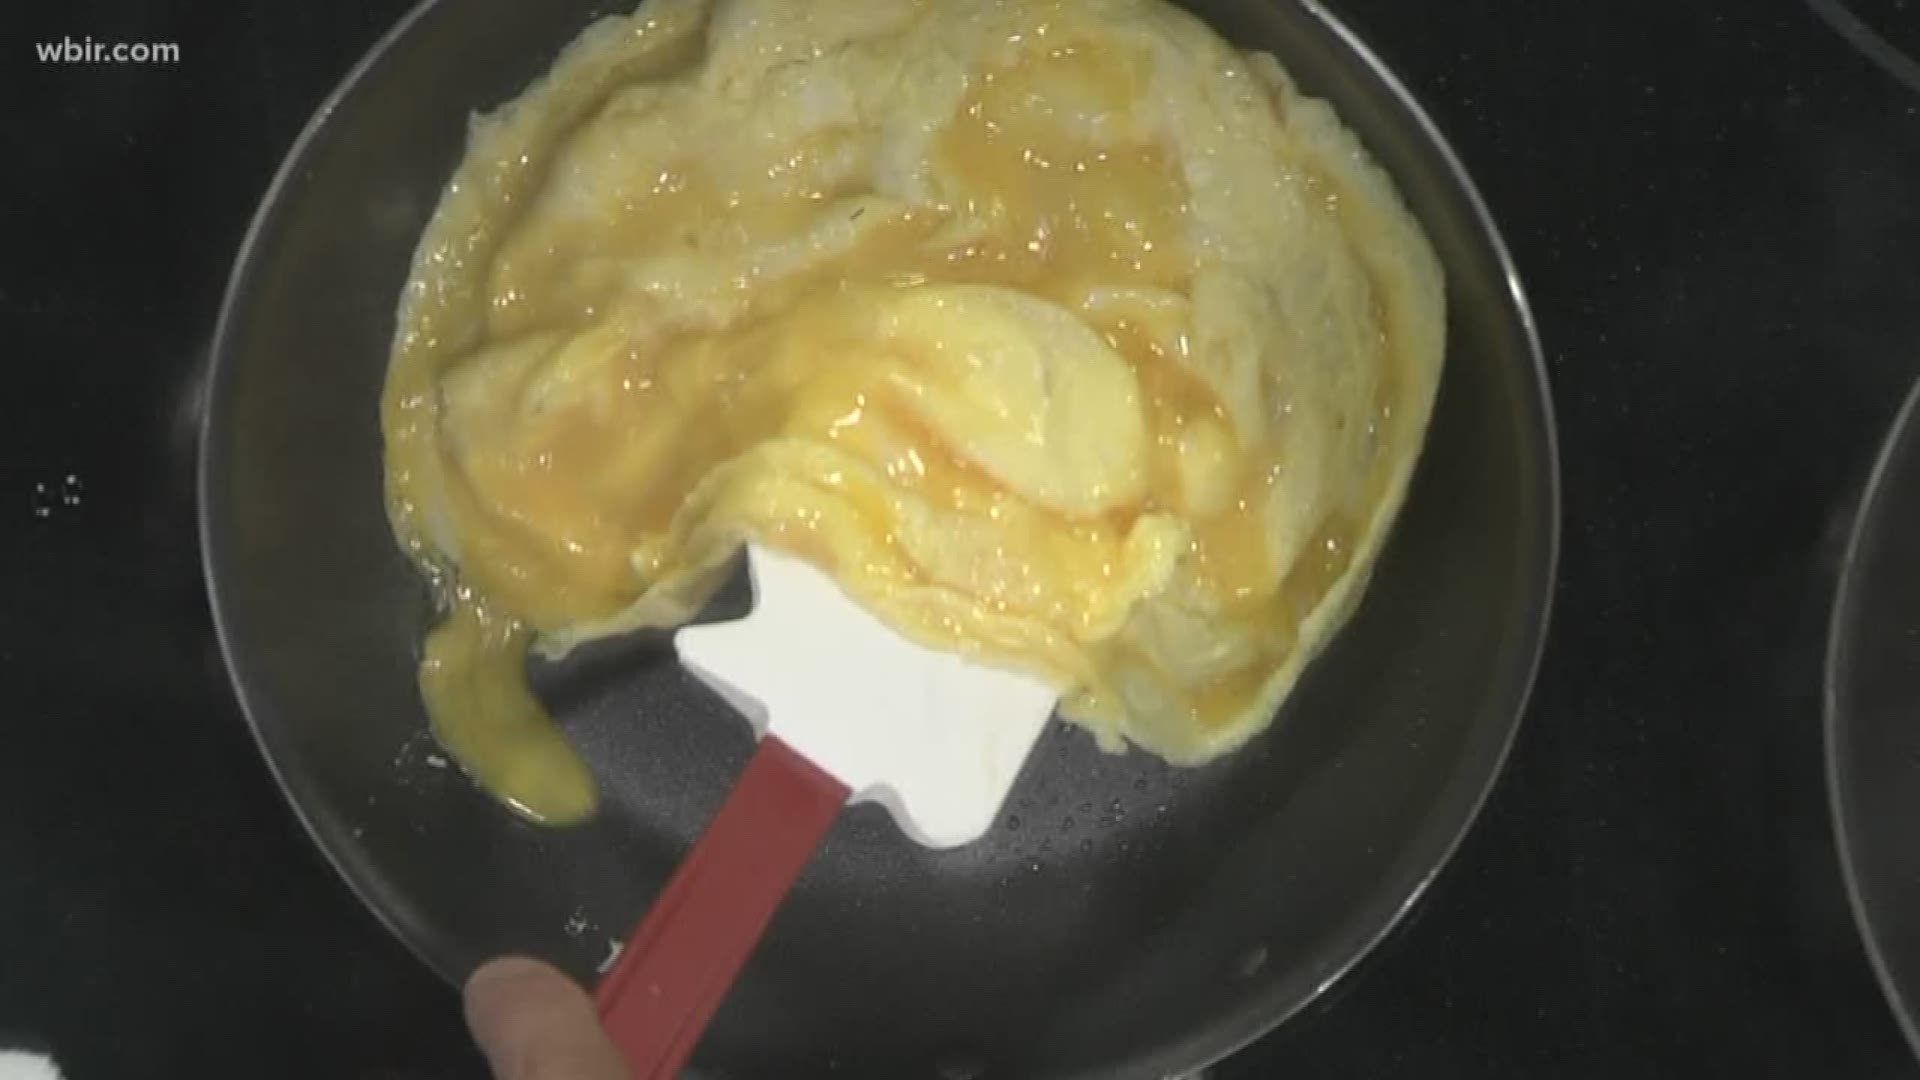 They're a breakfast or brunch favorite at many  homes. But, do you know how to make the perfect omelet? Chef Roman Campbell with Applewood Farmhouse has 5 tips: Use a good non stick pan. Make sure pan is good and hot before adding butter or eggs. Make sure eggs are well beaten. Be sure to build layers in eggs/lift cooked edges and letting uncooked eggs underneath. Do not let eggs get brown, do not walk away once you start. Visit pplewoodfarmhouserestaurant.com for more. June 4, 2019-4pm.